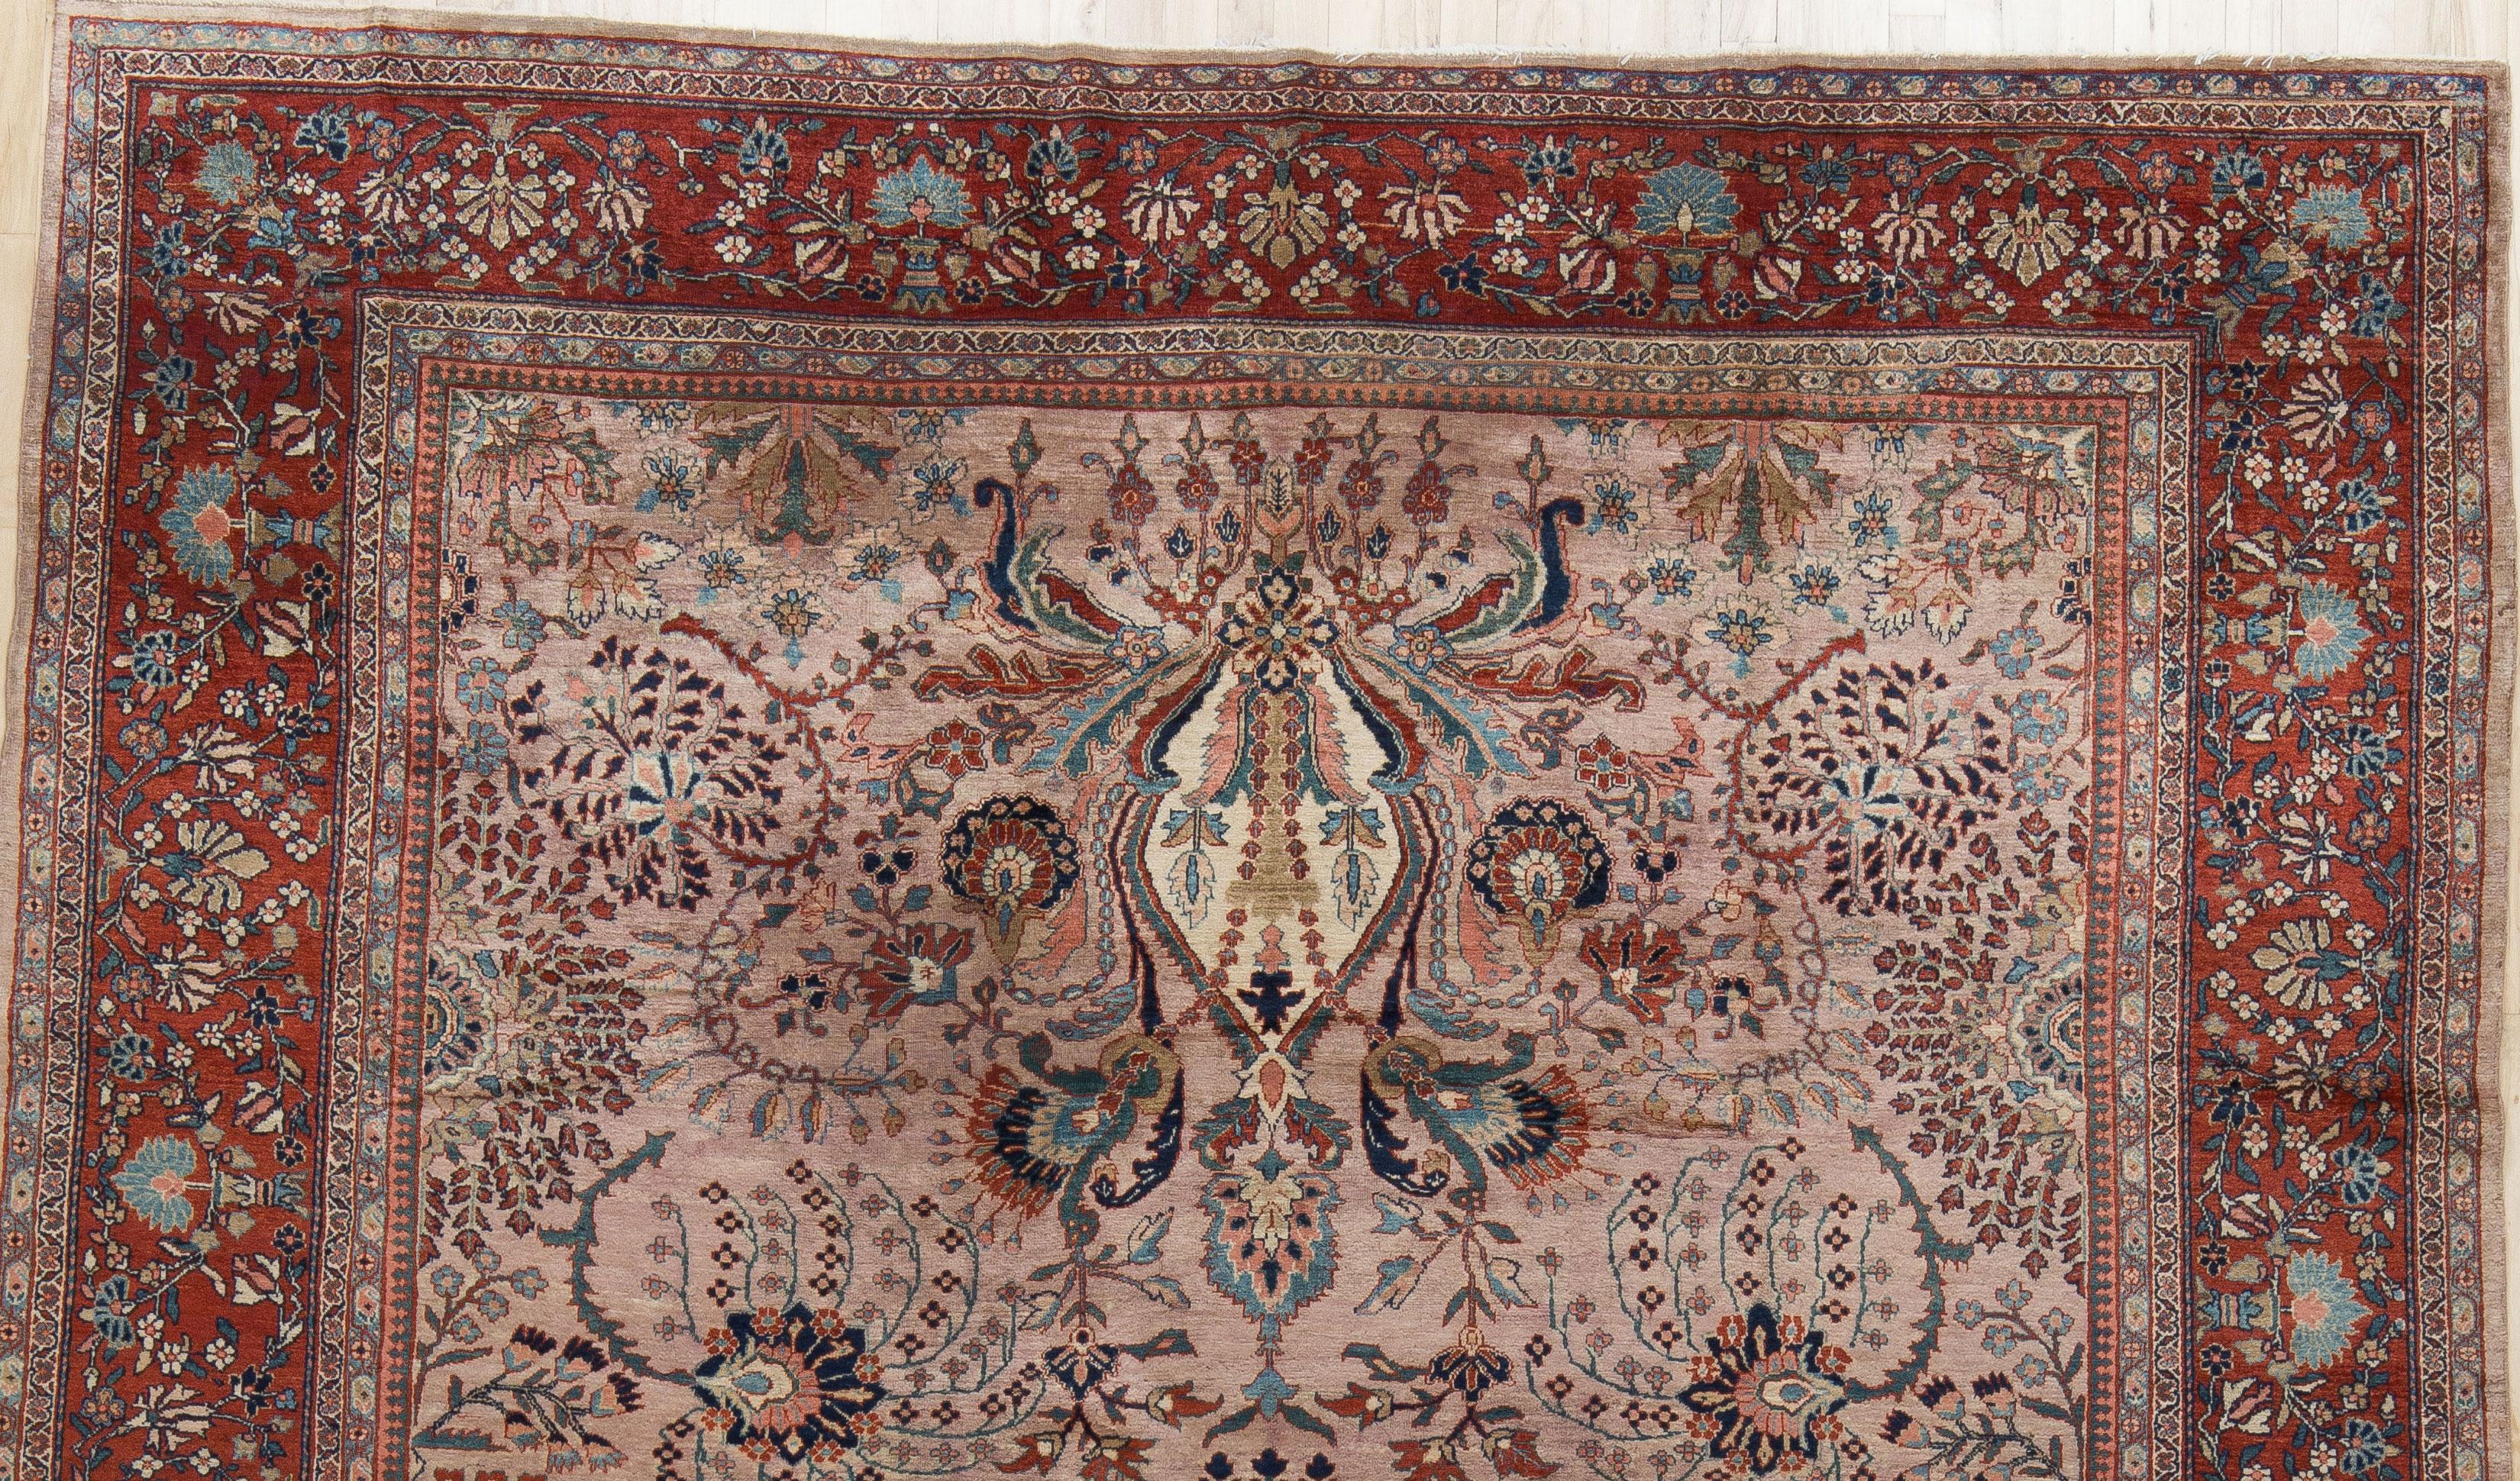 A beautiful turn of the century Ferahan Sarouk with a rare pink field color. A delicate floral design and madder red border. A finely woven carpet with a low, even wool pile. Naturally dyed and preserved. 